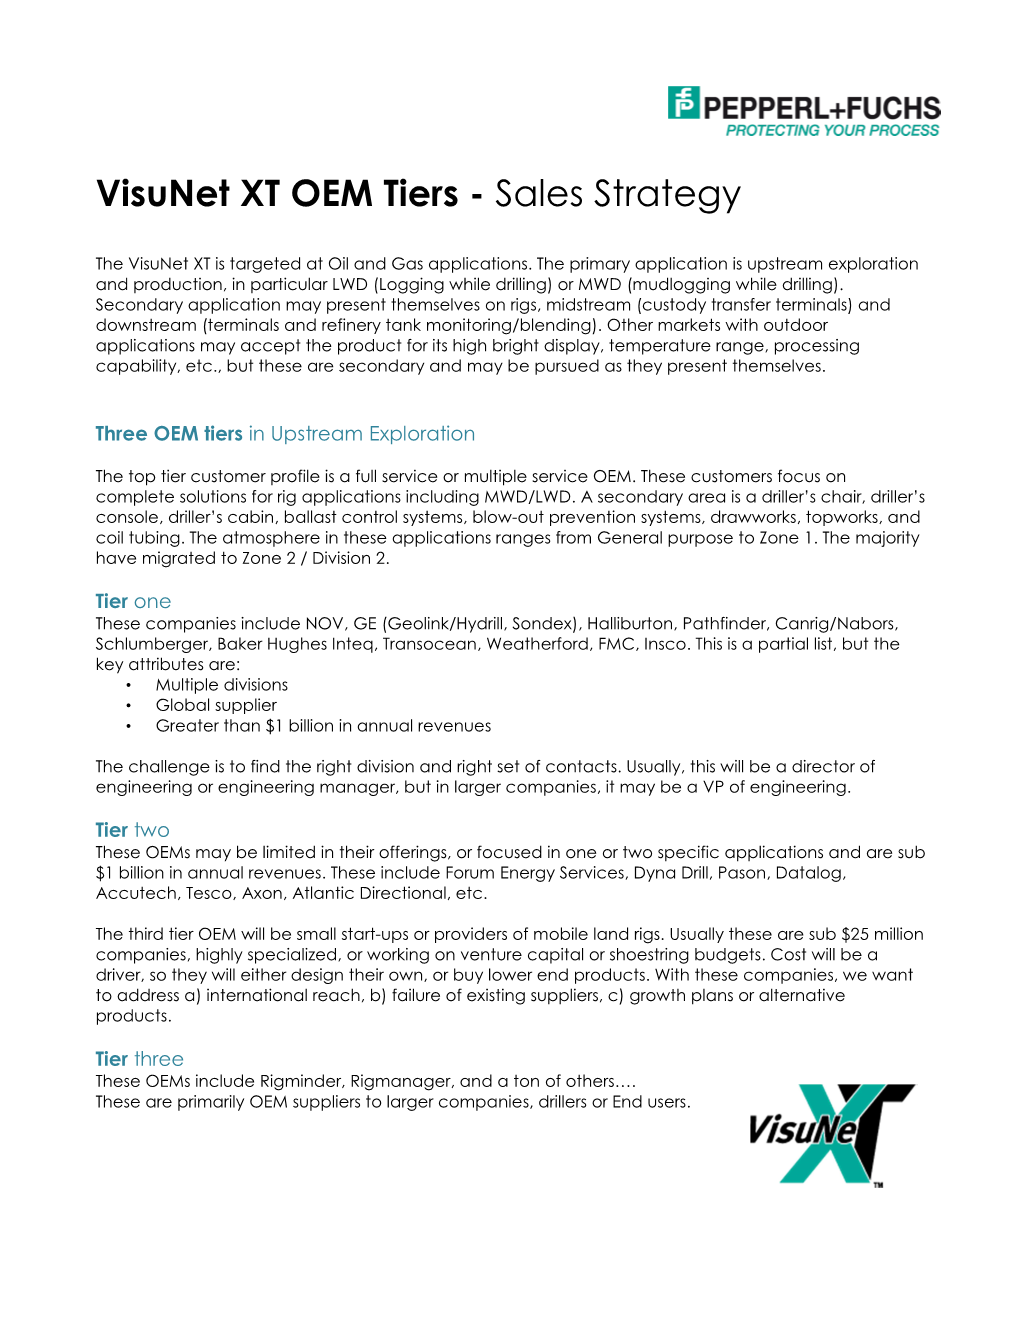 O&G Drilling OEM Tier Sales Strategy